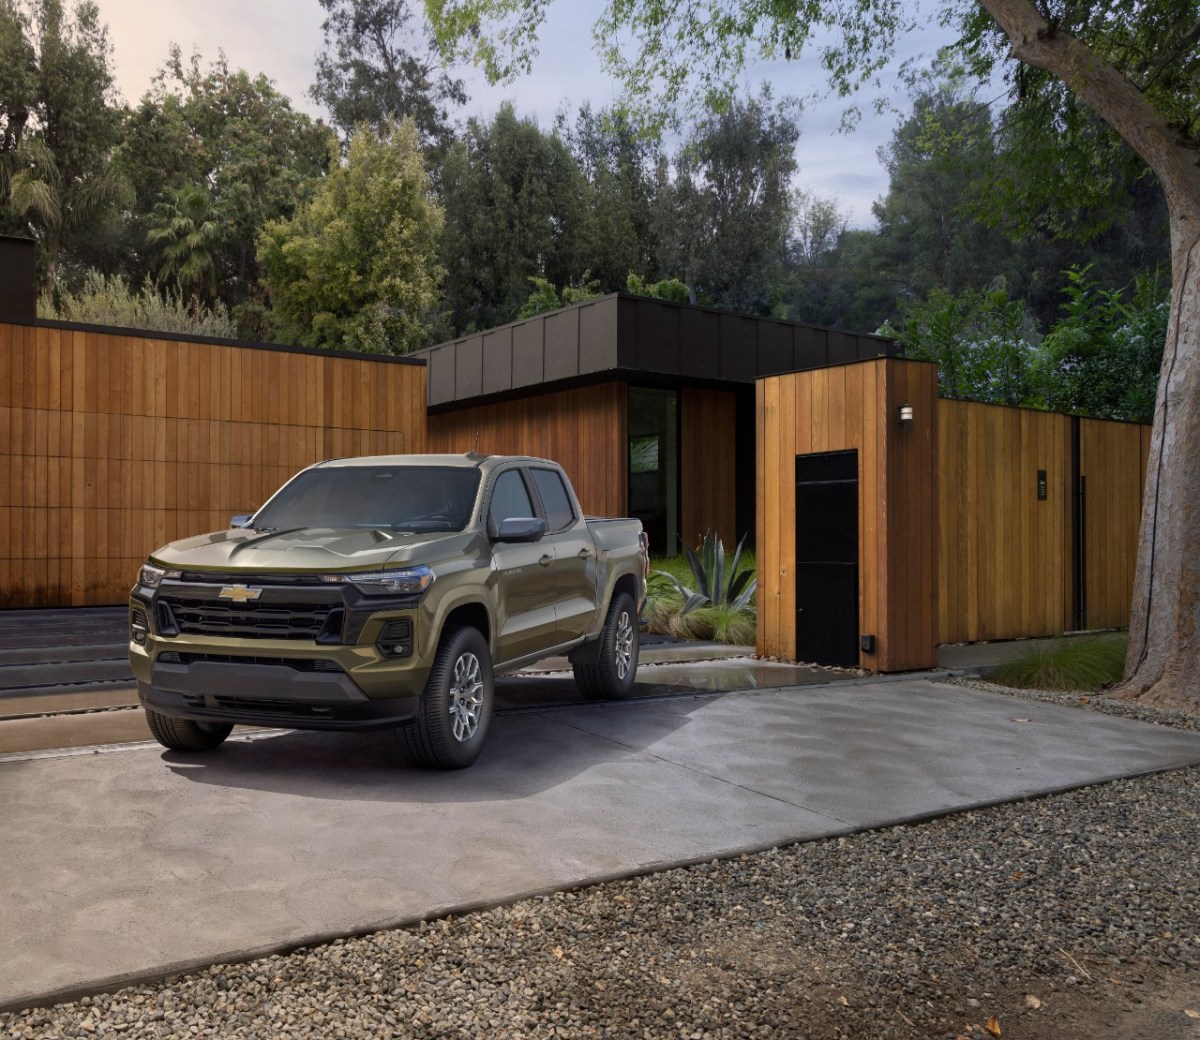 2023 Chevy Colorado in Brown parked in a modern home